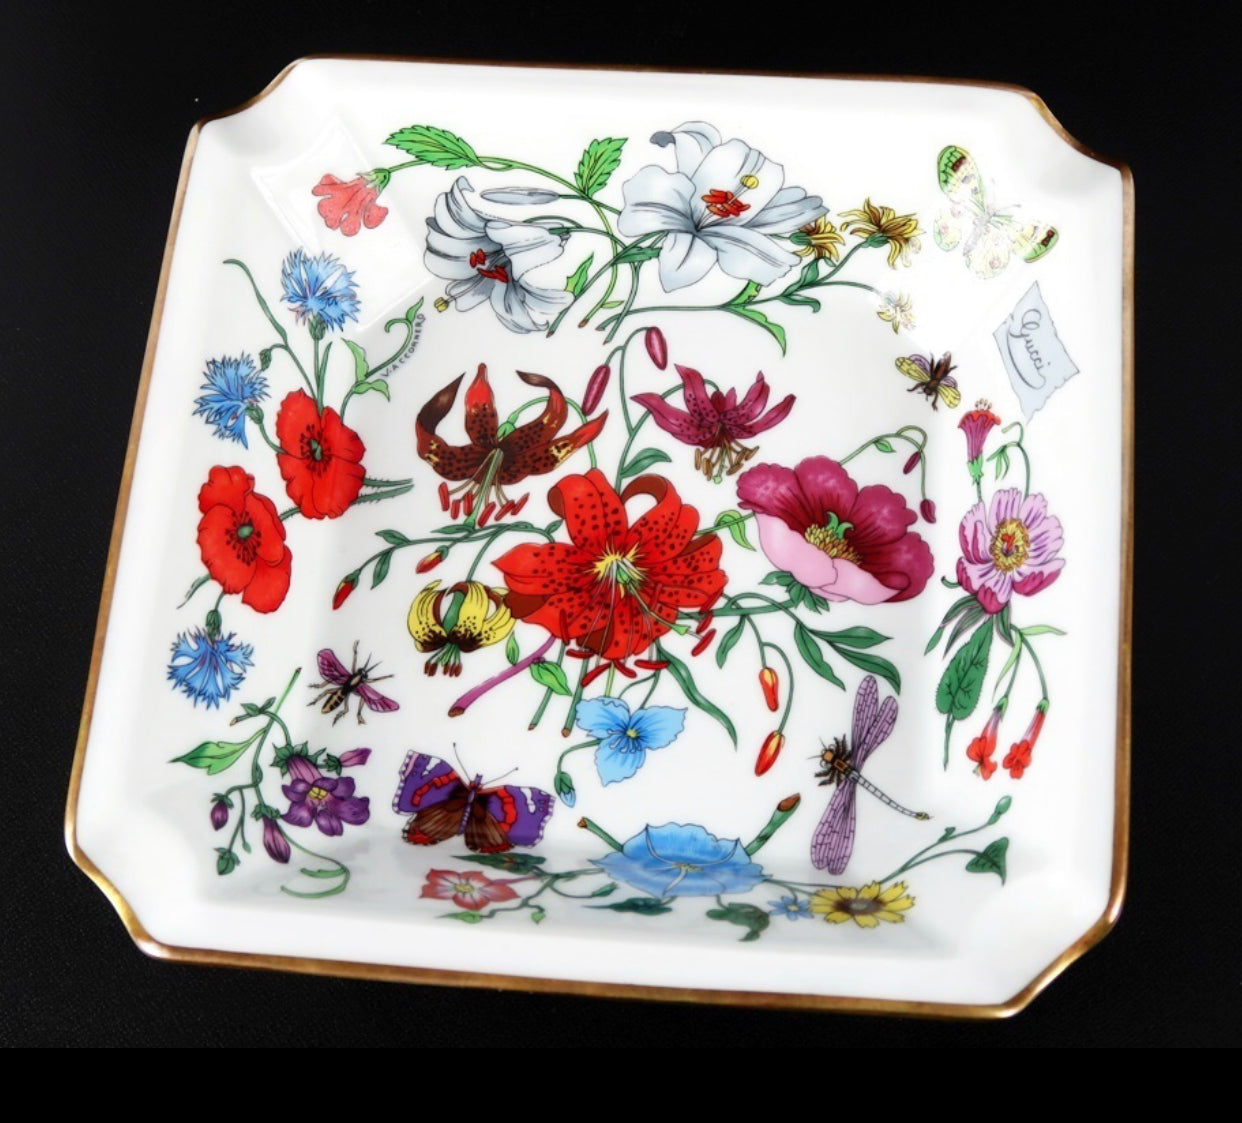 1980's vintage Gucci ceramic flower and butterflies plate, porcelain ashtray. Rarest masterpieces from Gucci and BERNARDAUD LIMOGES. Accornero Collection.